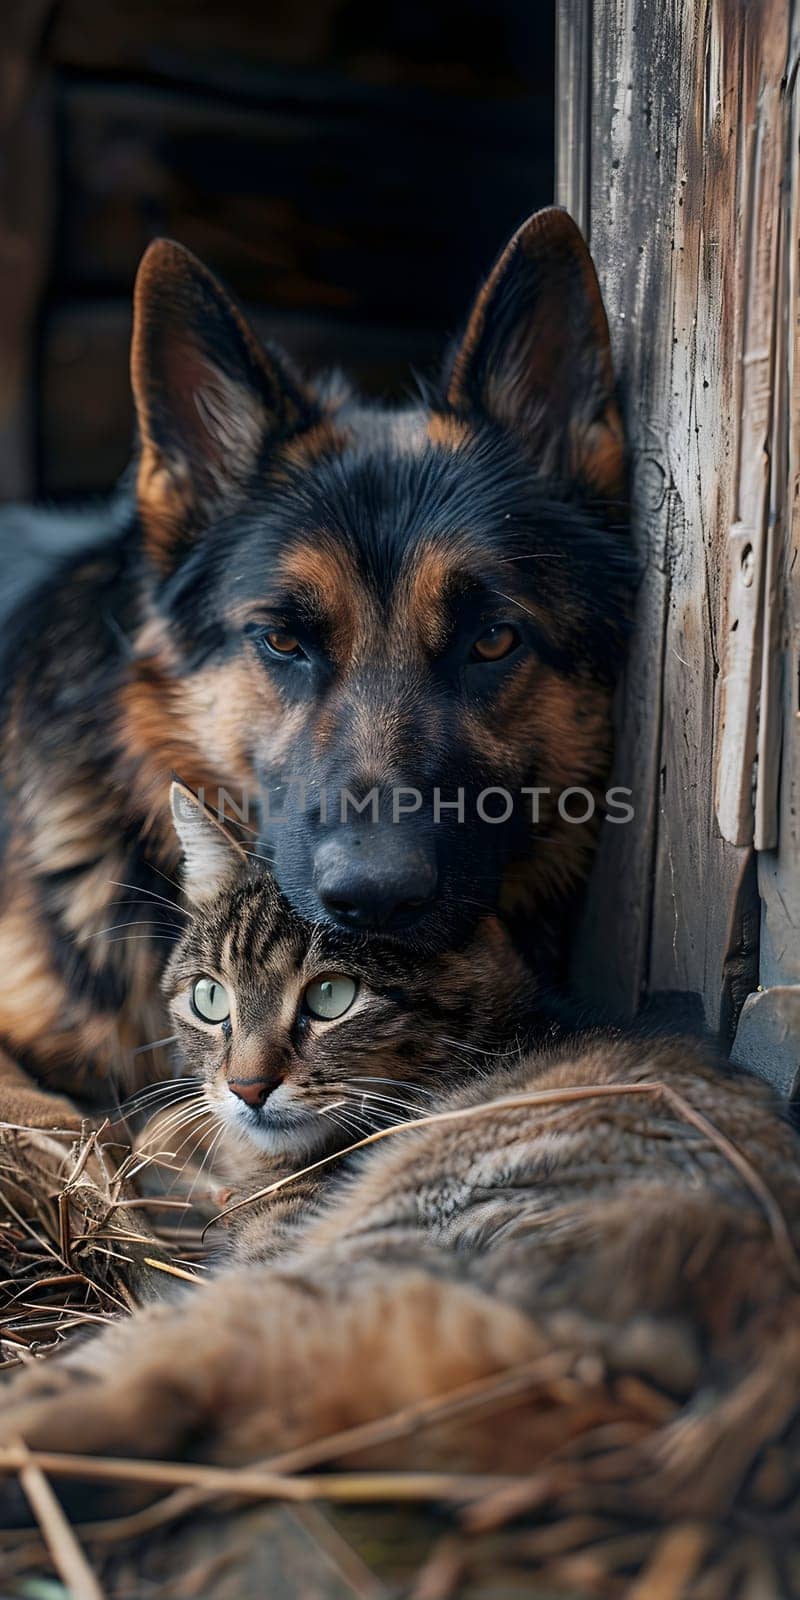 A carnivore dog breed and a small to mediumsized Felidae cat with whiskers are laying next to each other by the window